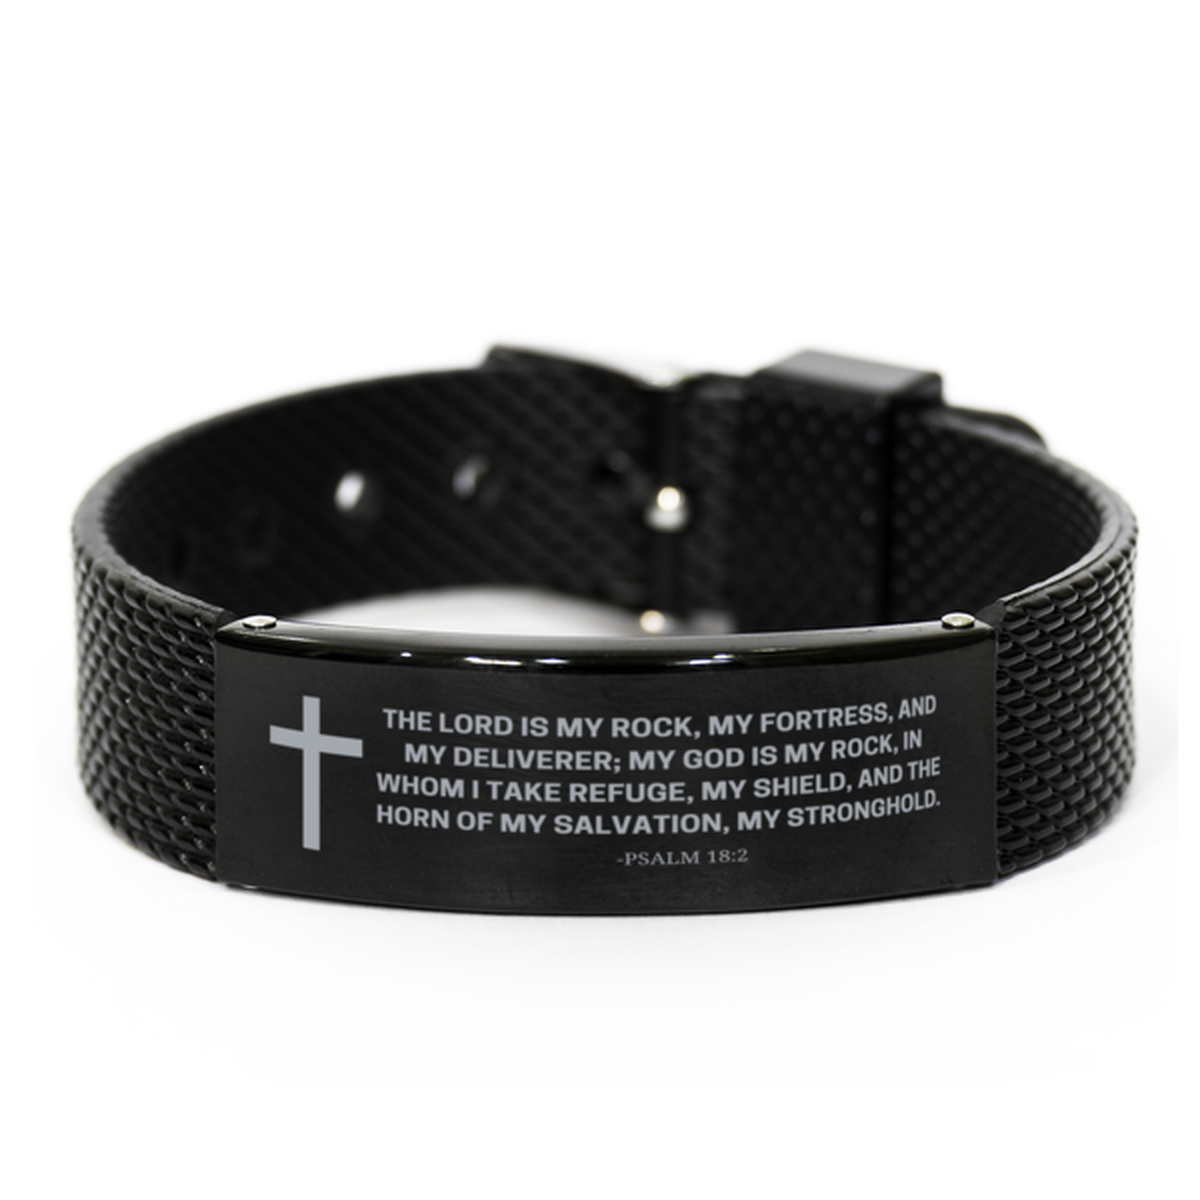 Baptism Gifts For Teenage Boys Girls, Christian Bible Verse Black Shark Mesh Bracelet, The Lord is my rock, Catholic Confirmation Gifts for Son, Godson, Grandson, Nephew